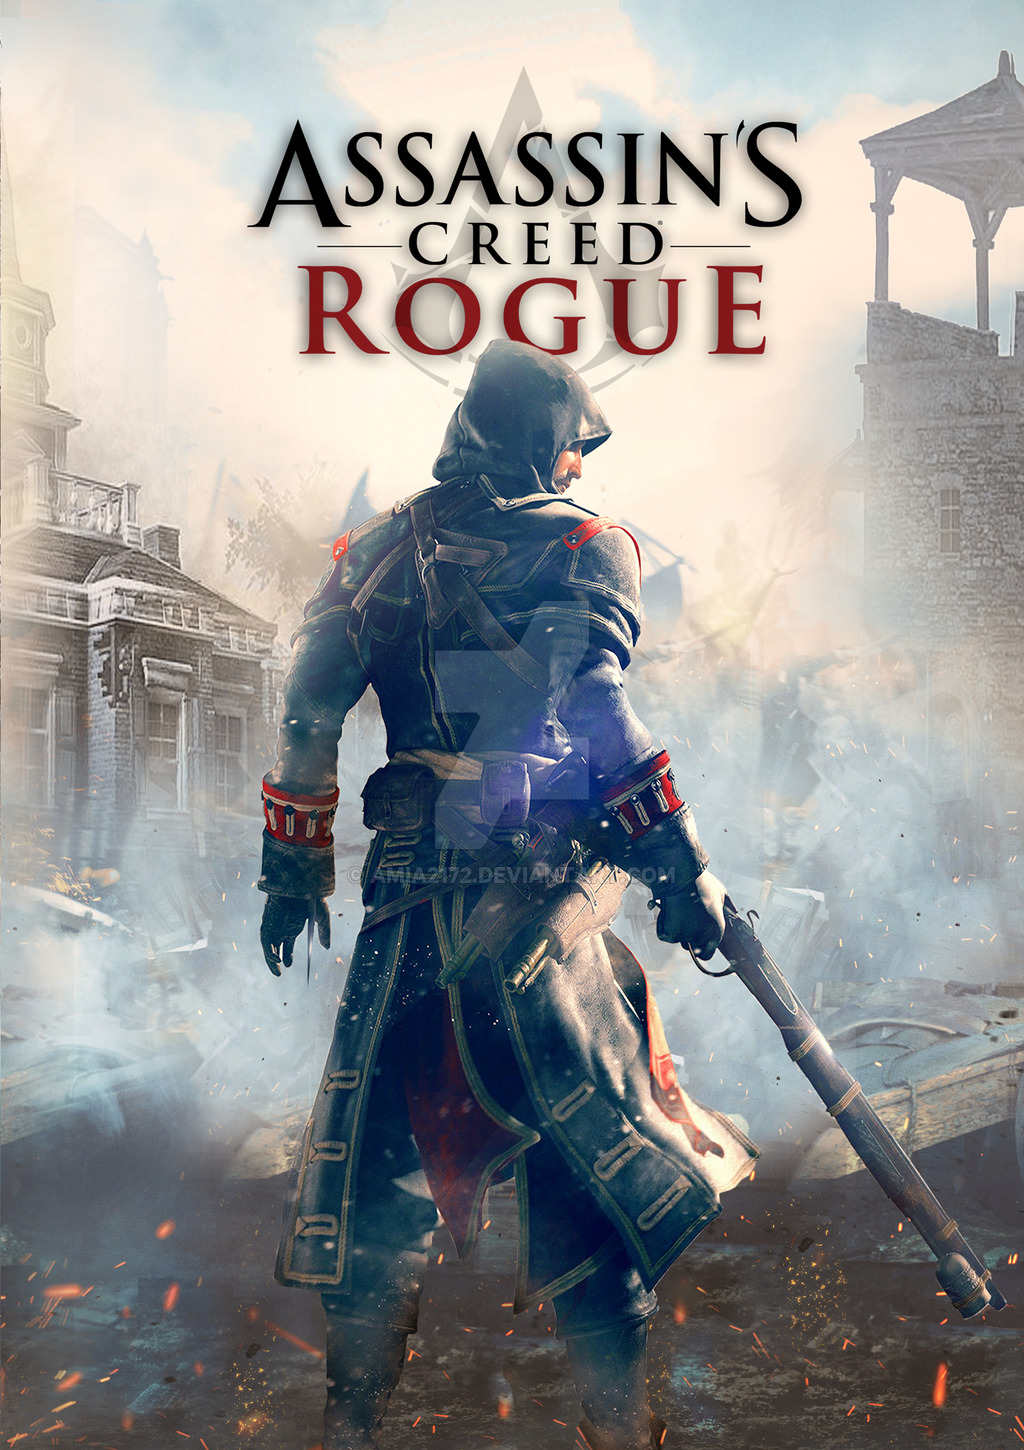 Picture - Assassin's Creed Rogue Wallpaper Iphone - HD Wallpaper 